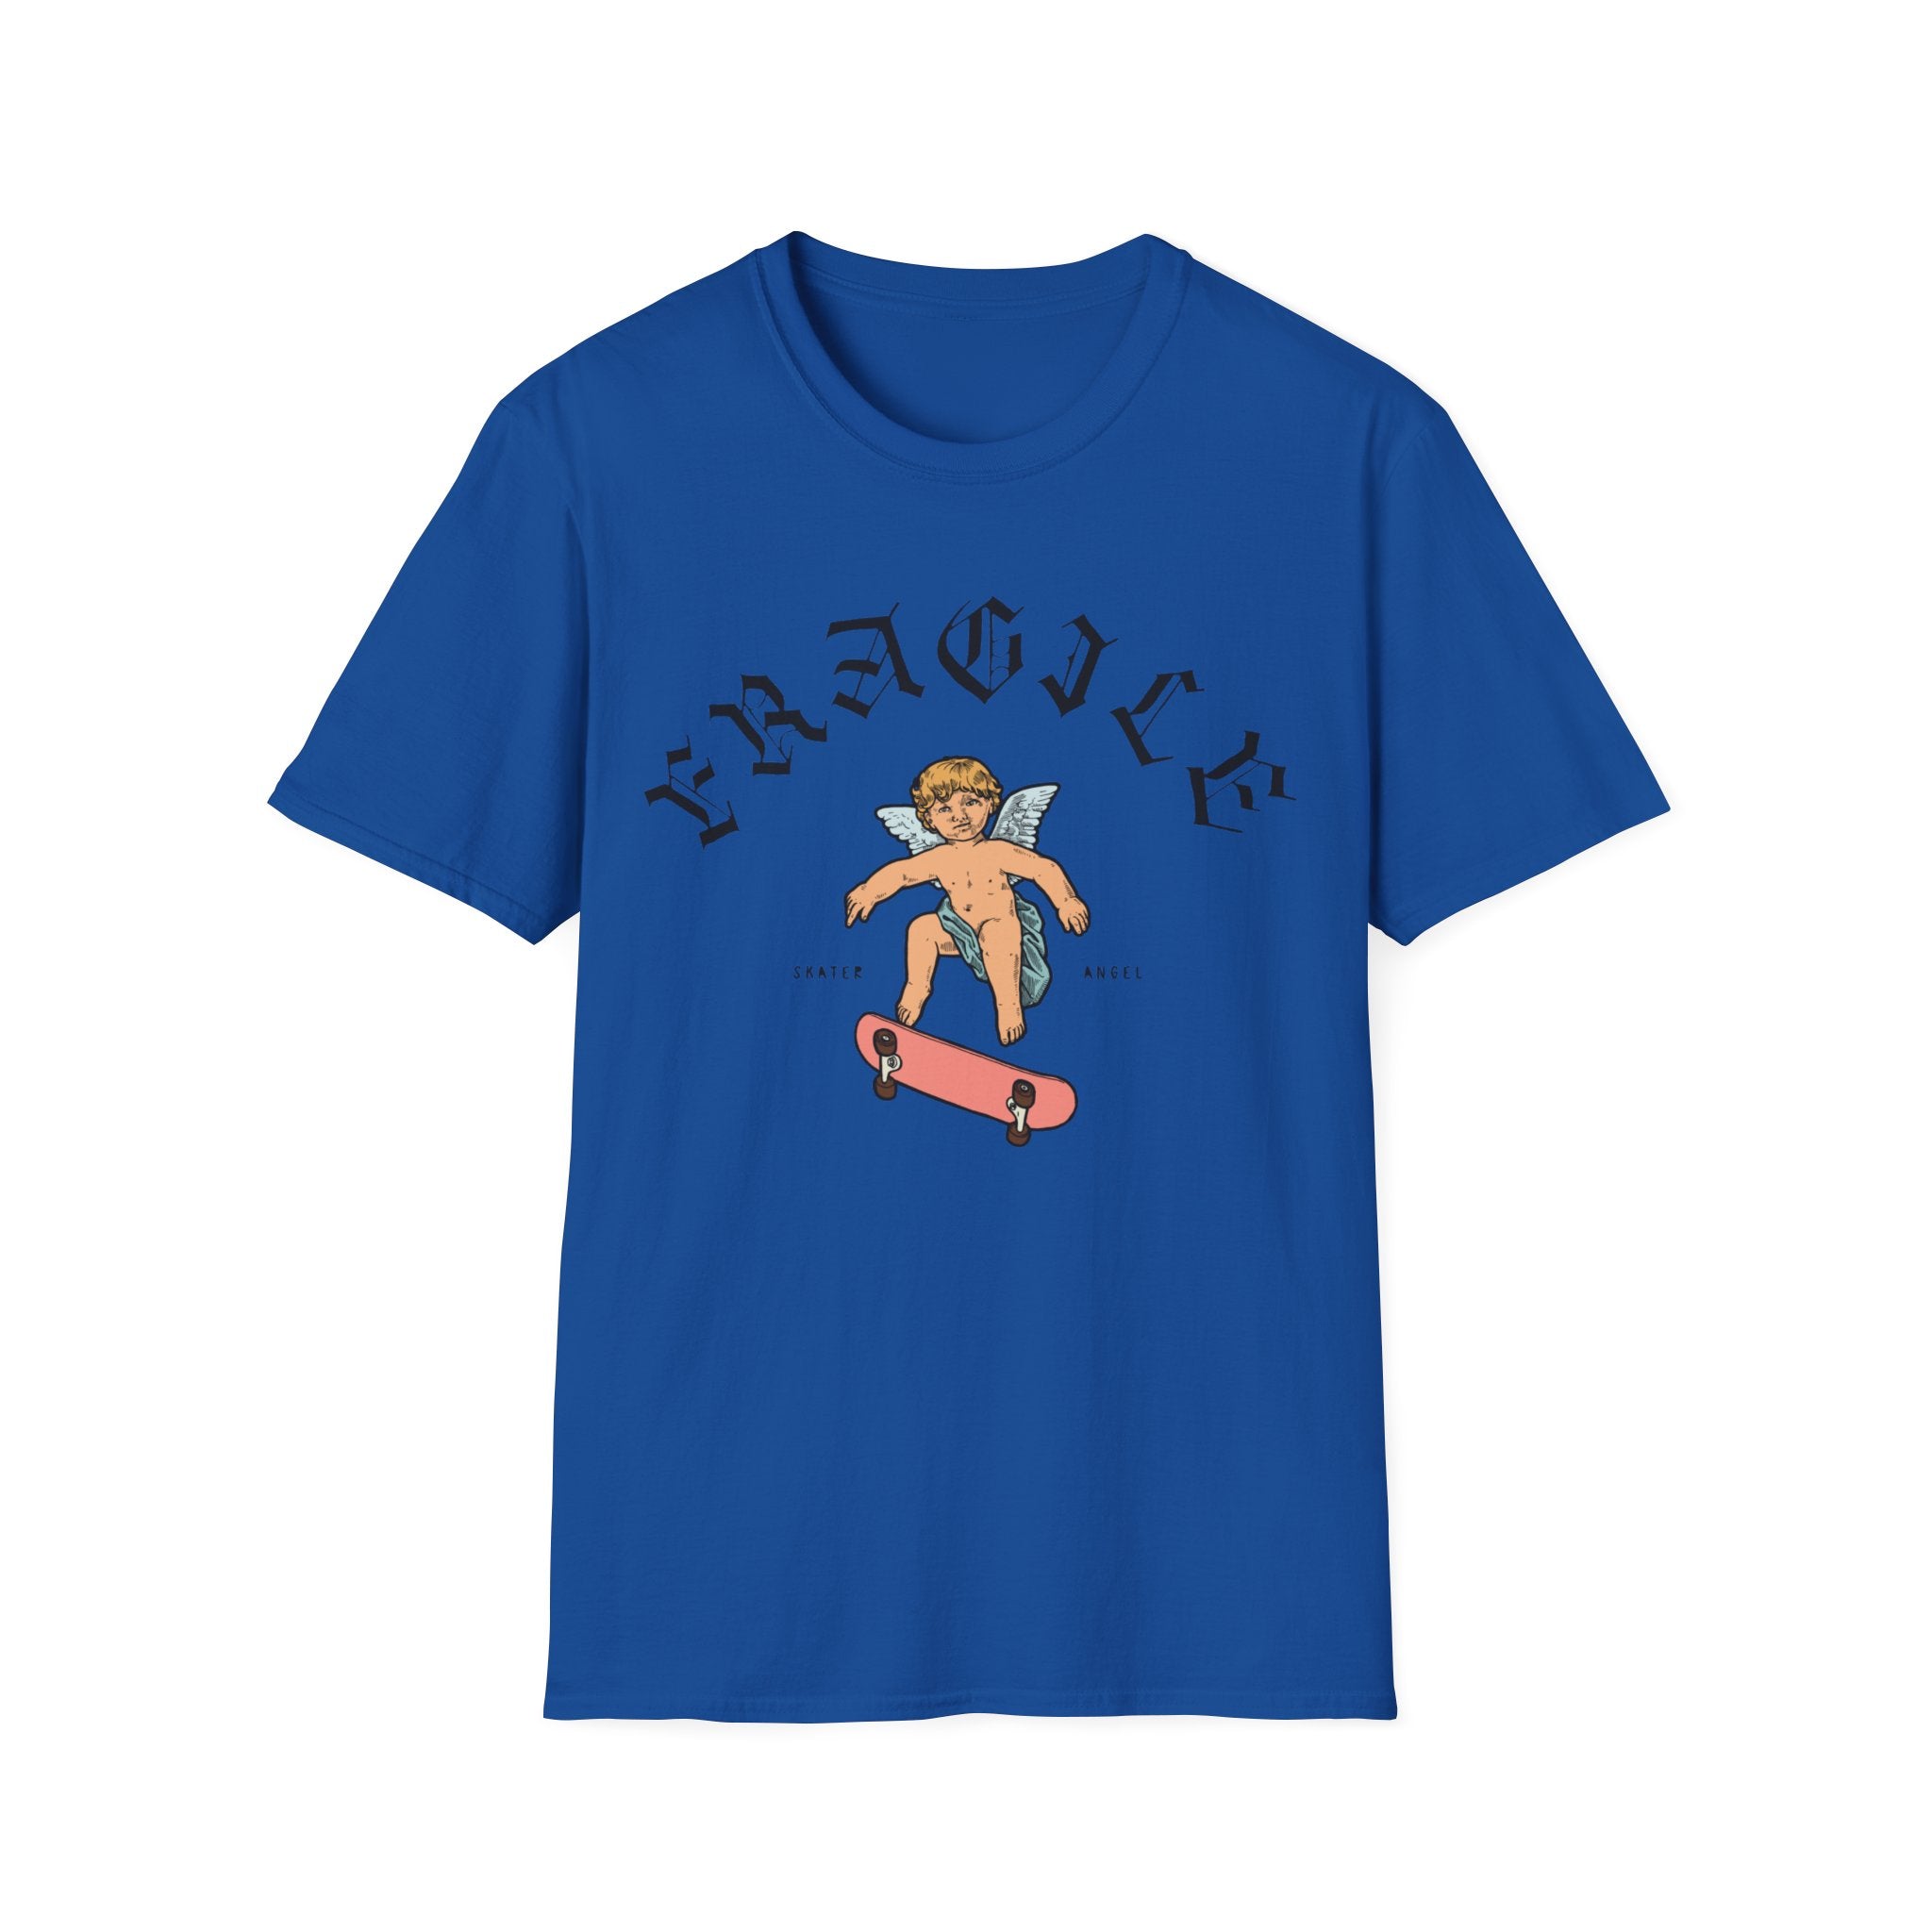 A soft blue Skater Angel t-shirt featuring a relaxed fit and an image of a girl riding a skateboard.